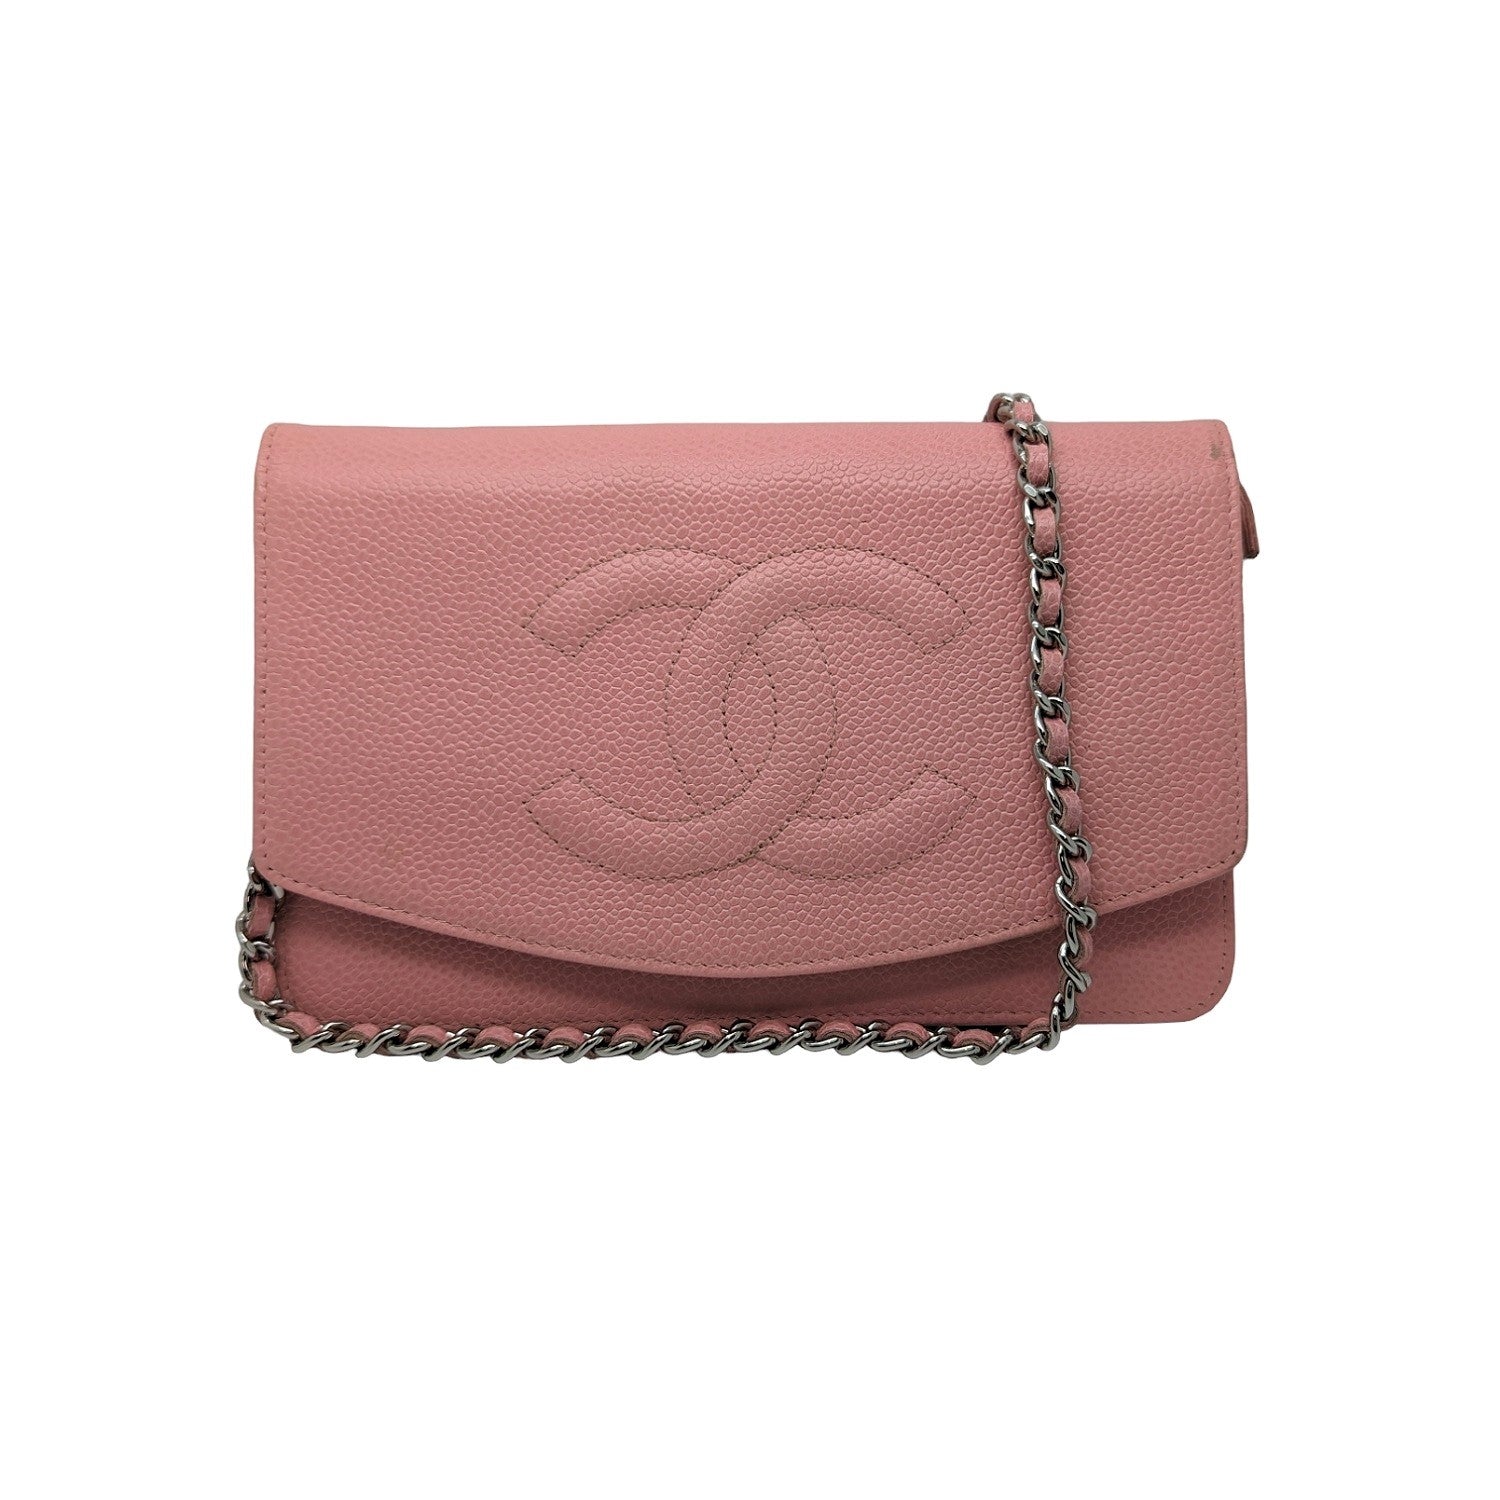 Timeless/classique leather wallet Chanel Pink in Leather - 24489671